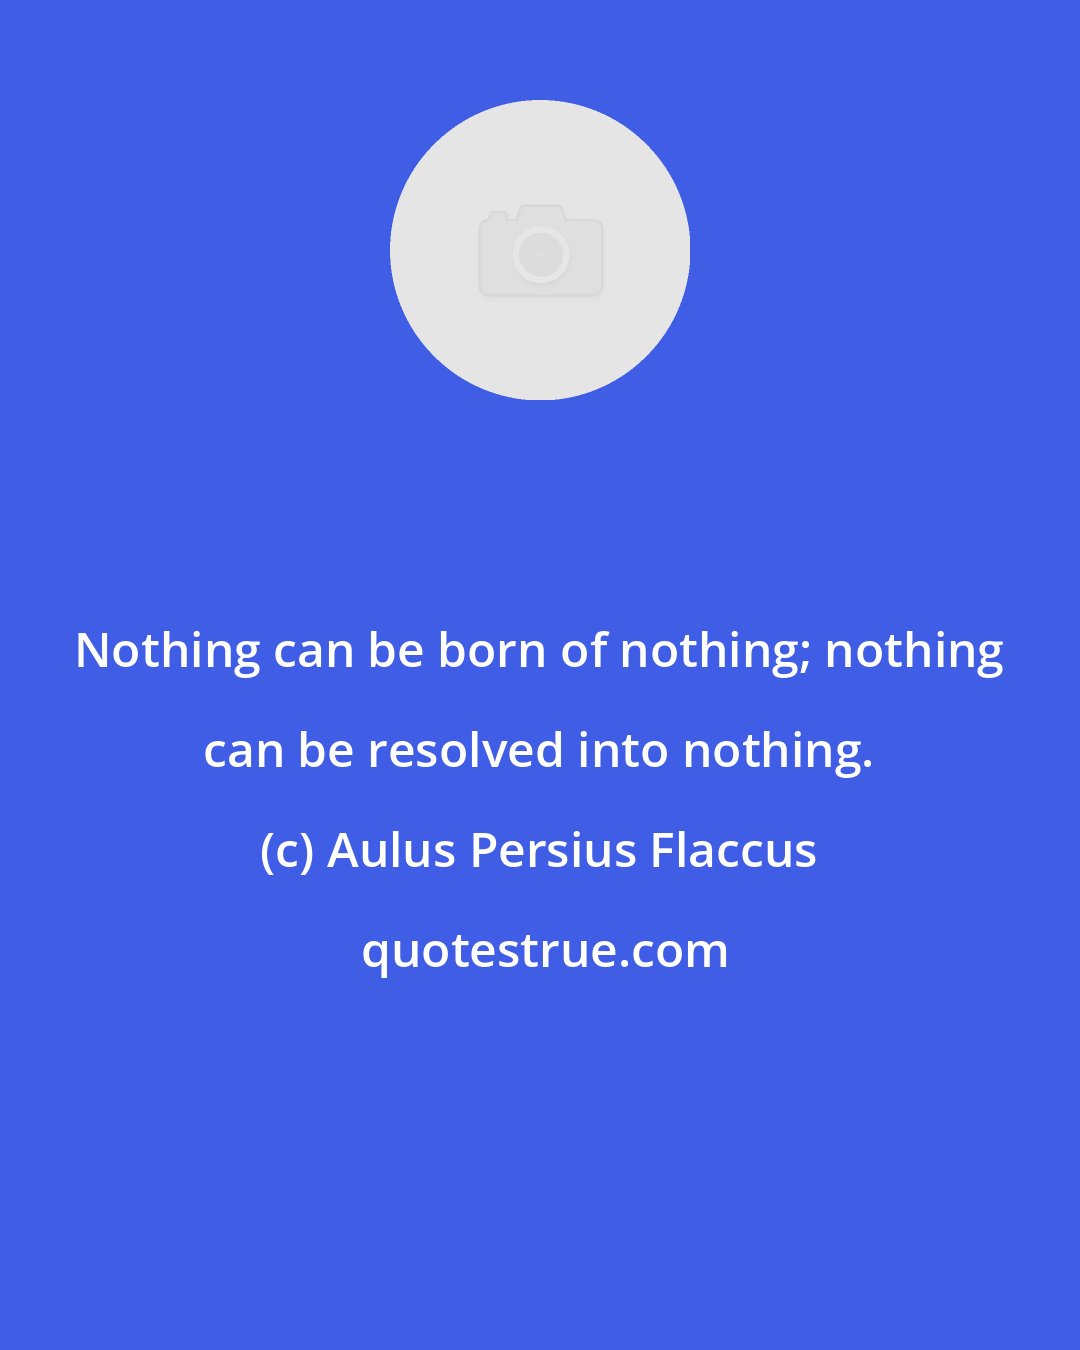 Aulus Persius Flaccus: Nothing can be born of nothing; nothing can be resolved into nothing.